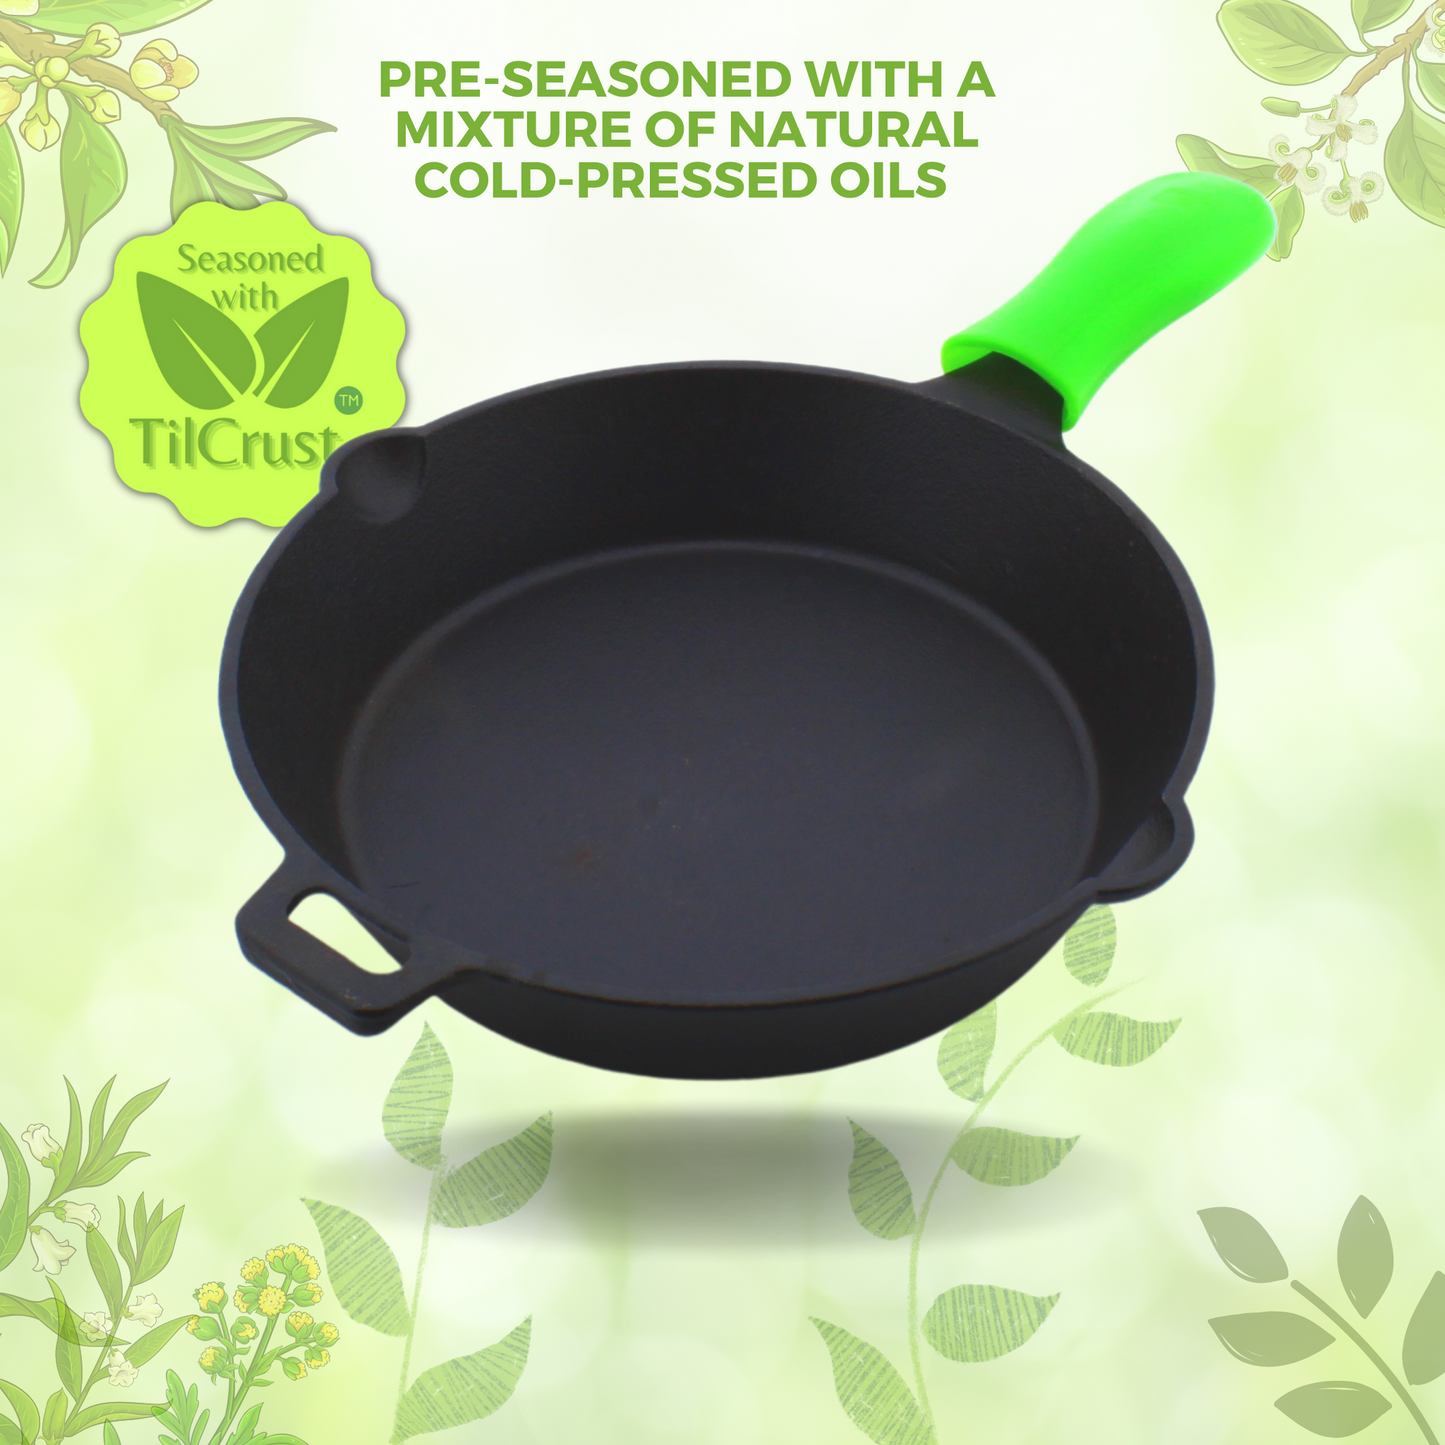 Cast Iron Skillet | Fry Pan | Pre-Seasoned | 10 inches | 2 Kgs | Induction Compatible | Free Silicone Heat Proof Sleeve Grip for hot handles